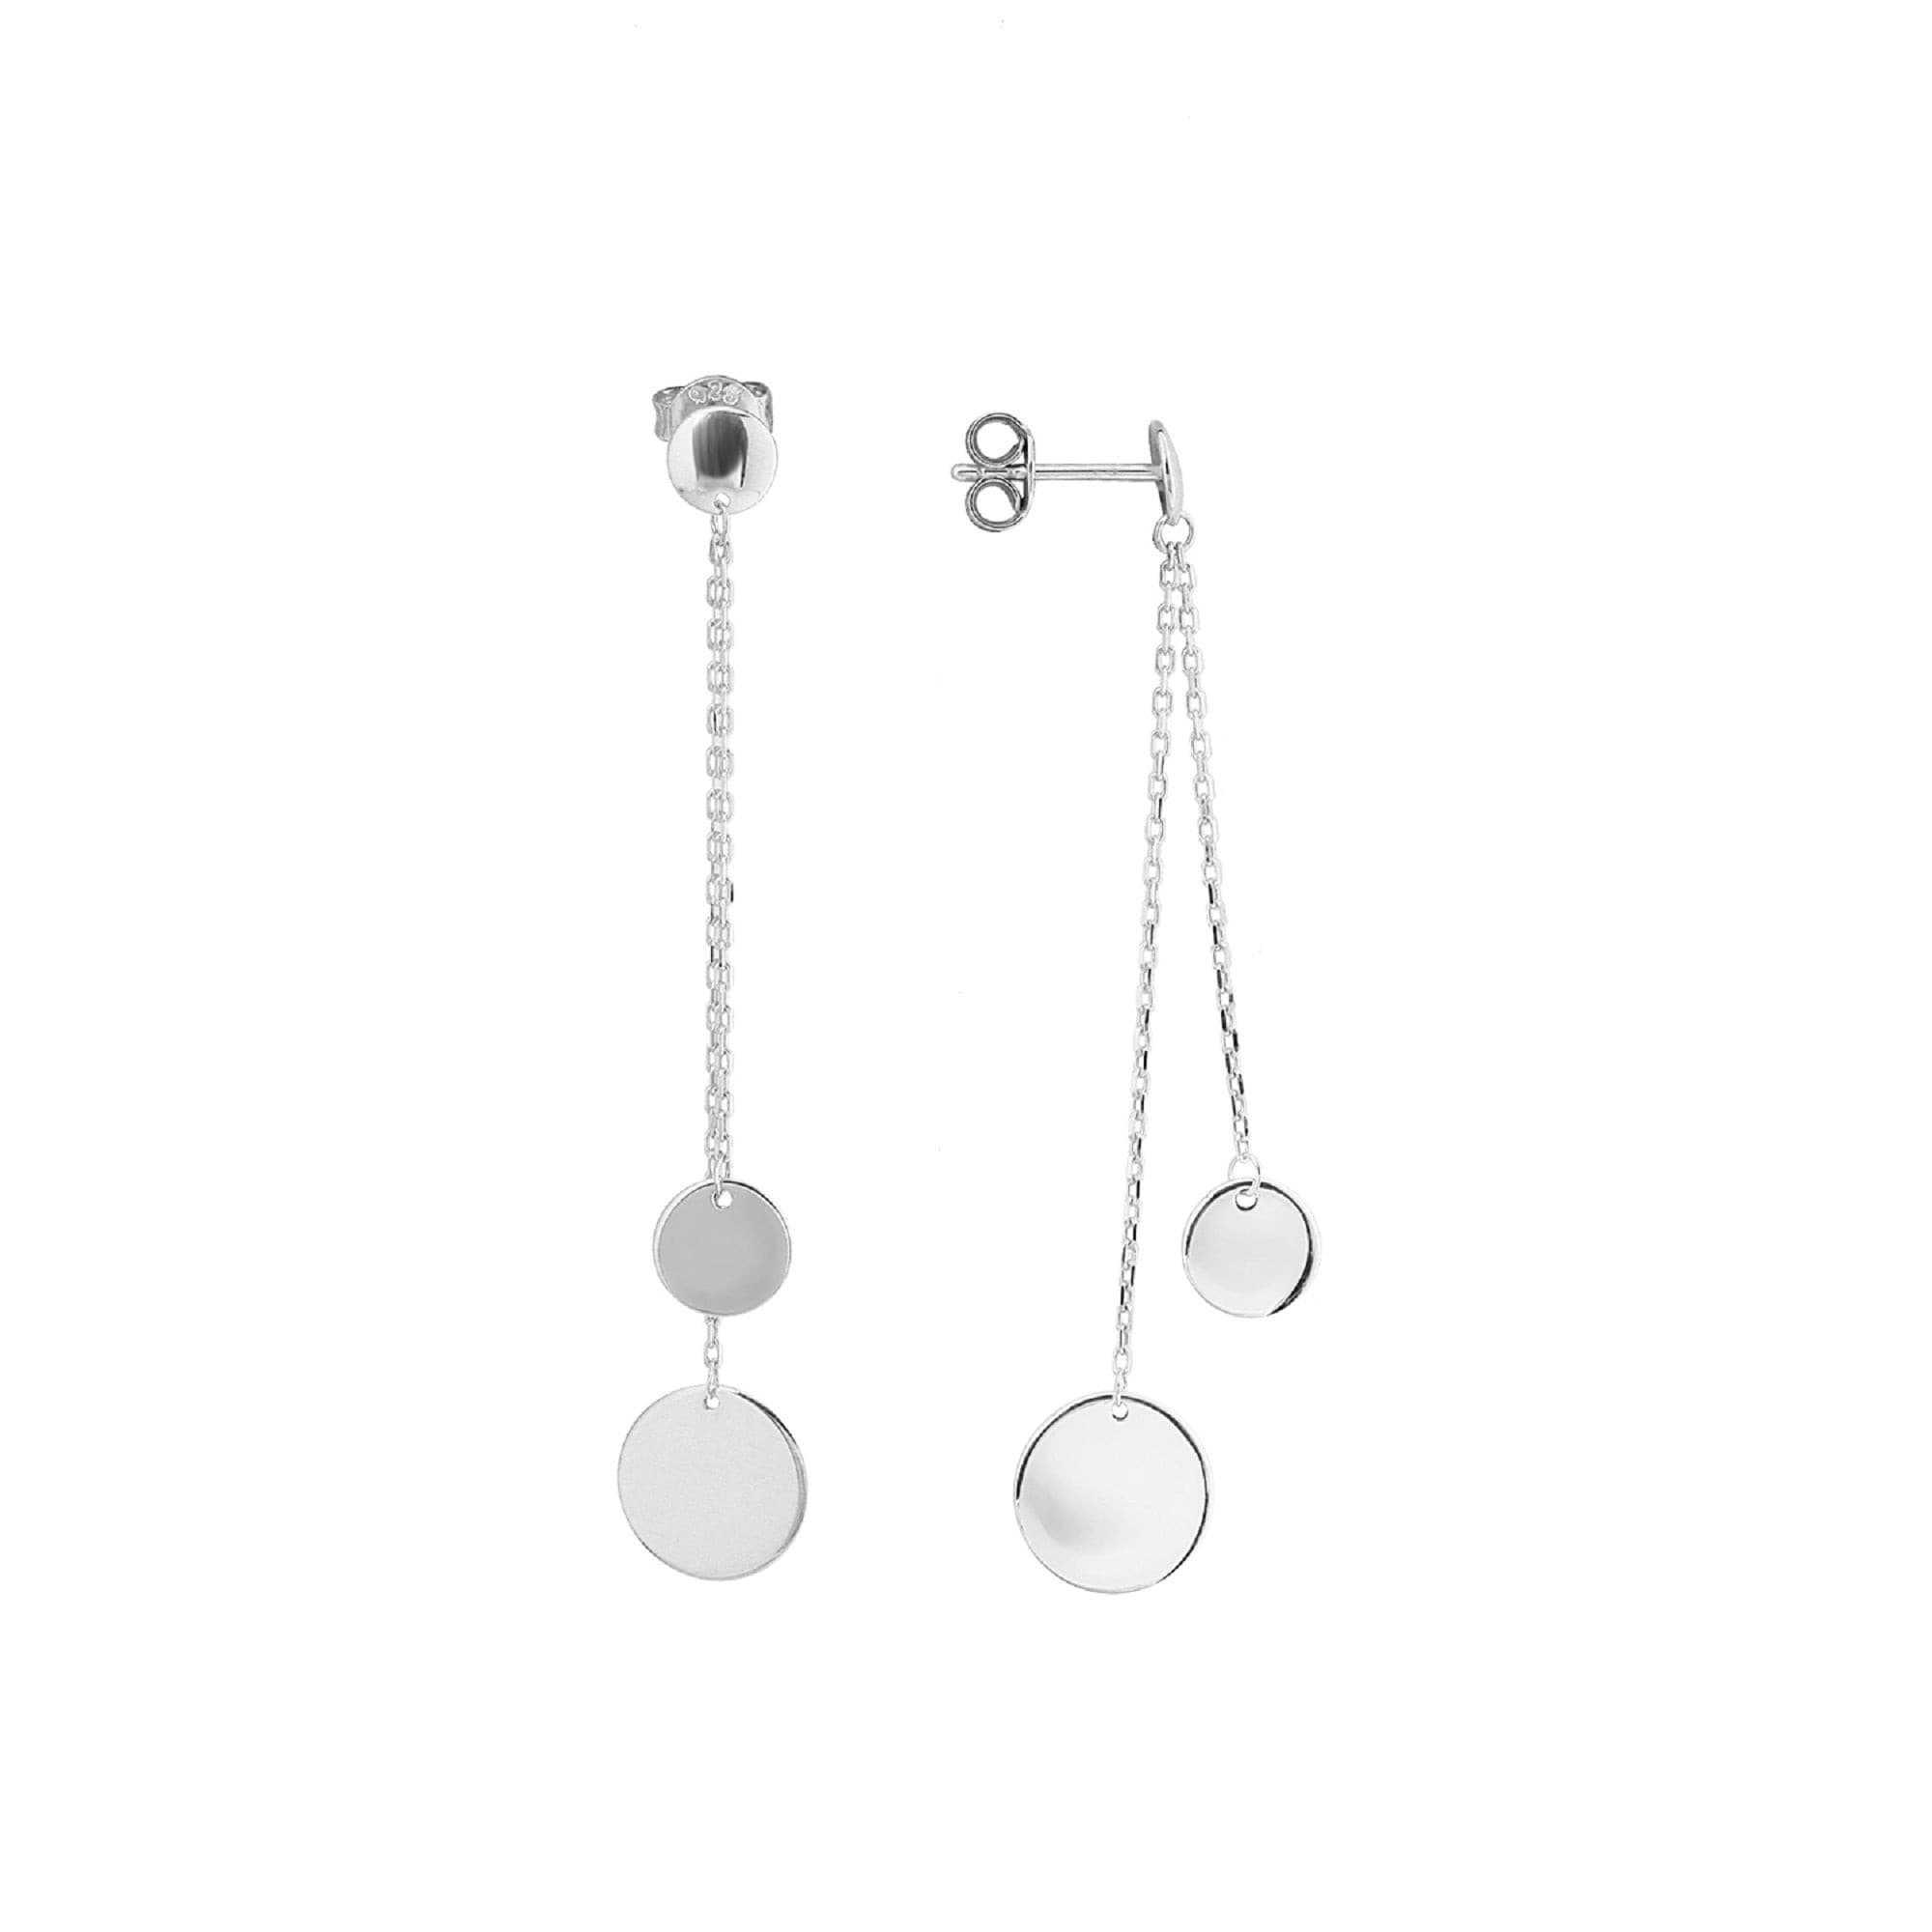 Lightweight Coin Silver Jewelry Set